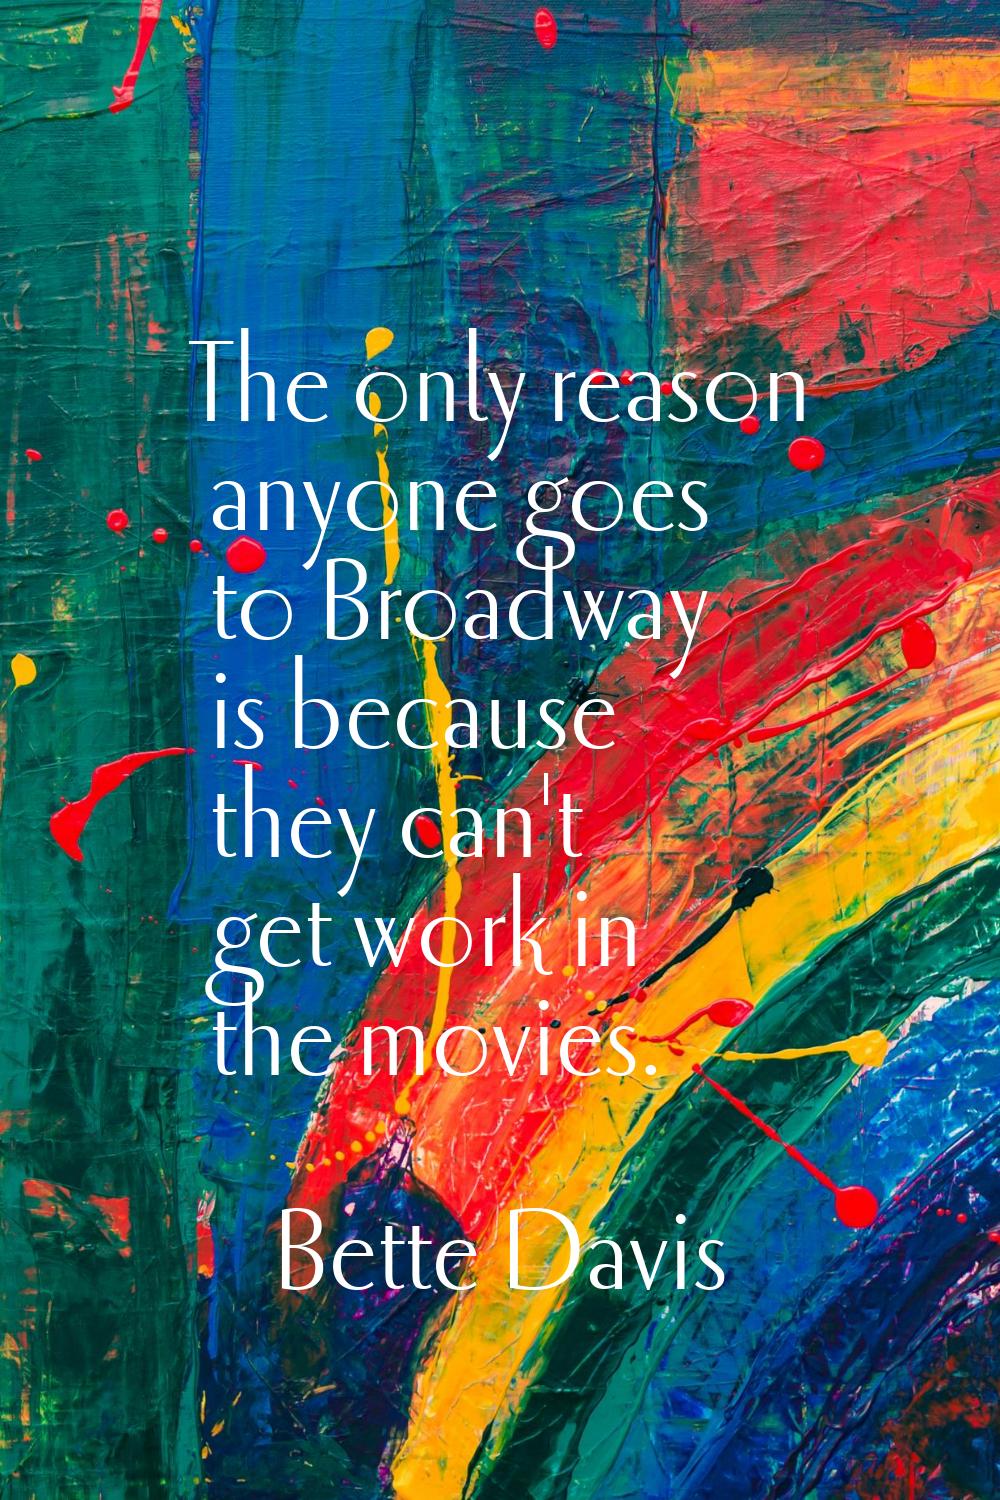 The only reason anyone goes to Broadway is because they can't get work in the movies.